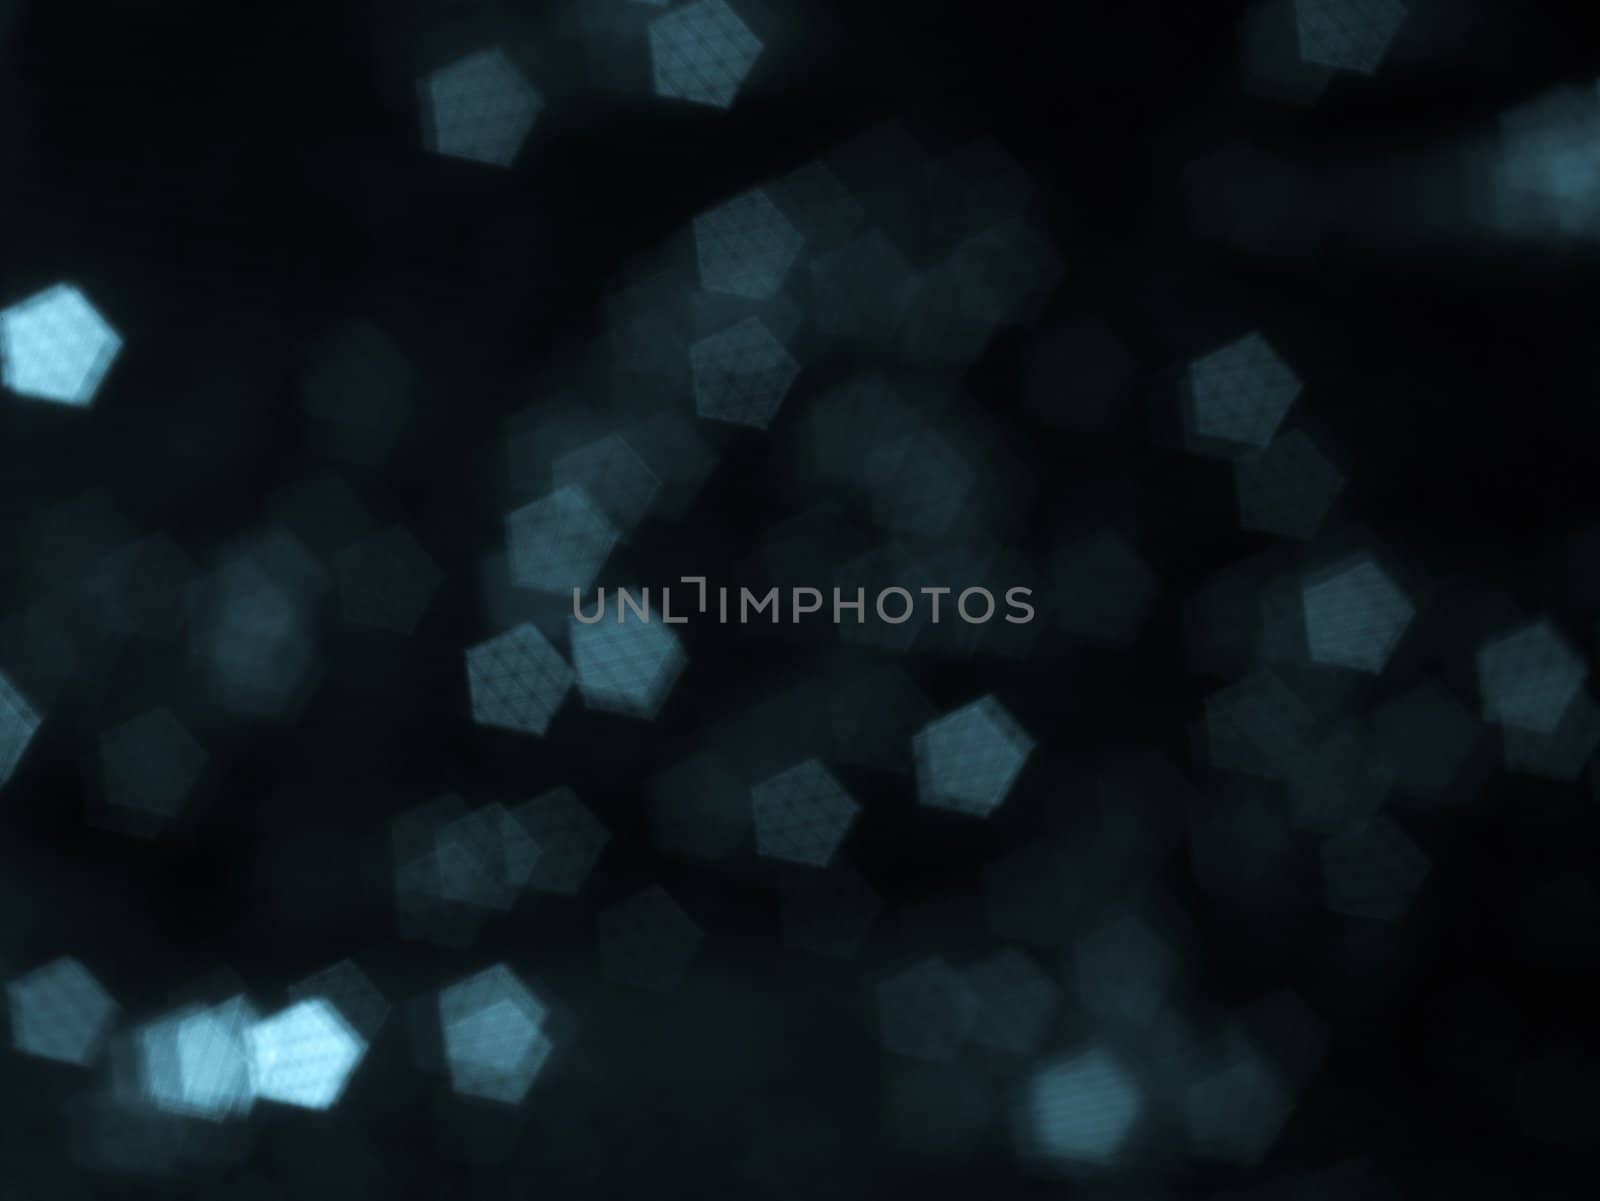 full frame abstract blurry background (optical star filter) showing some light effects